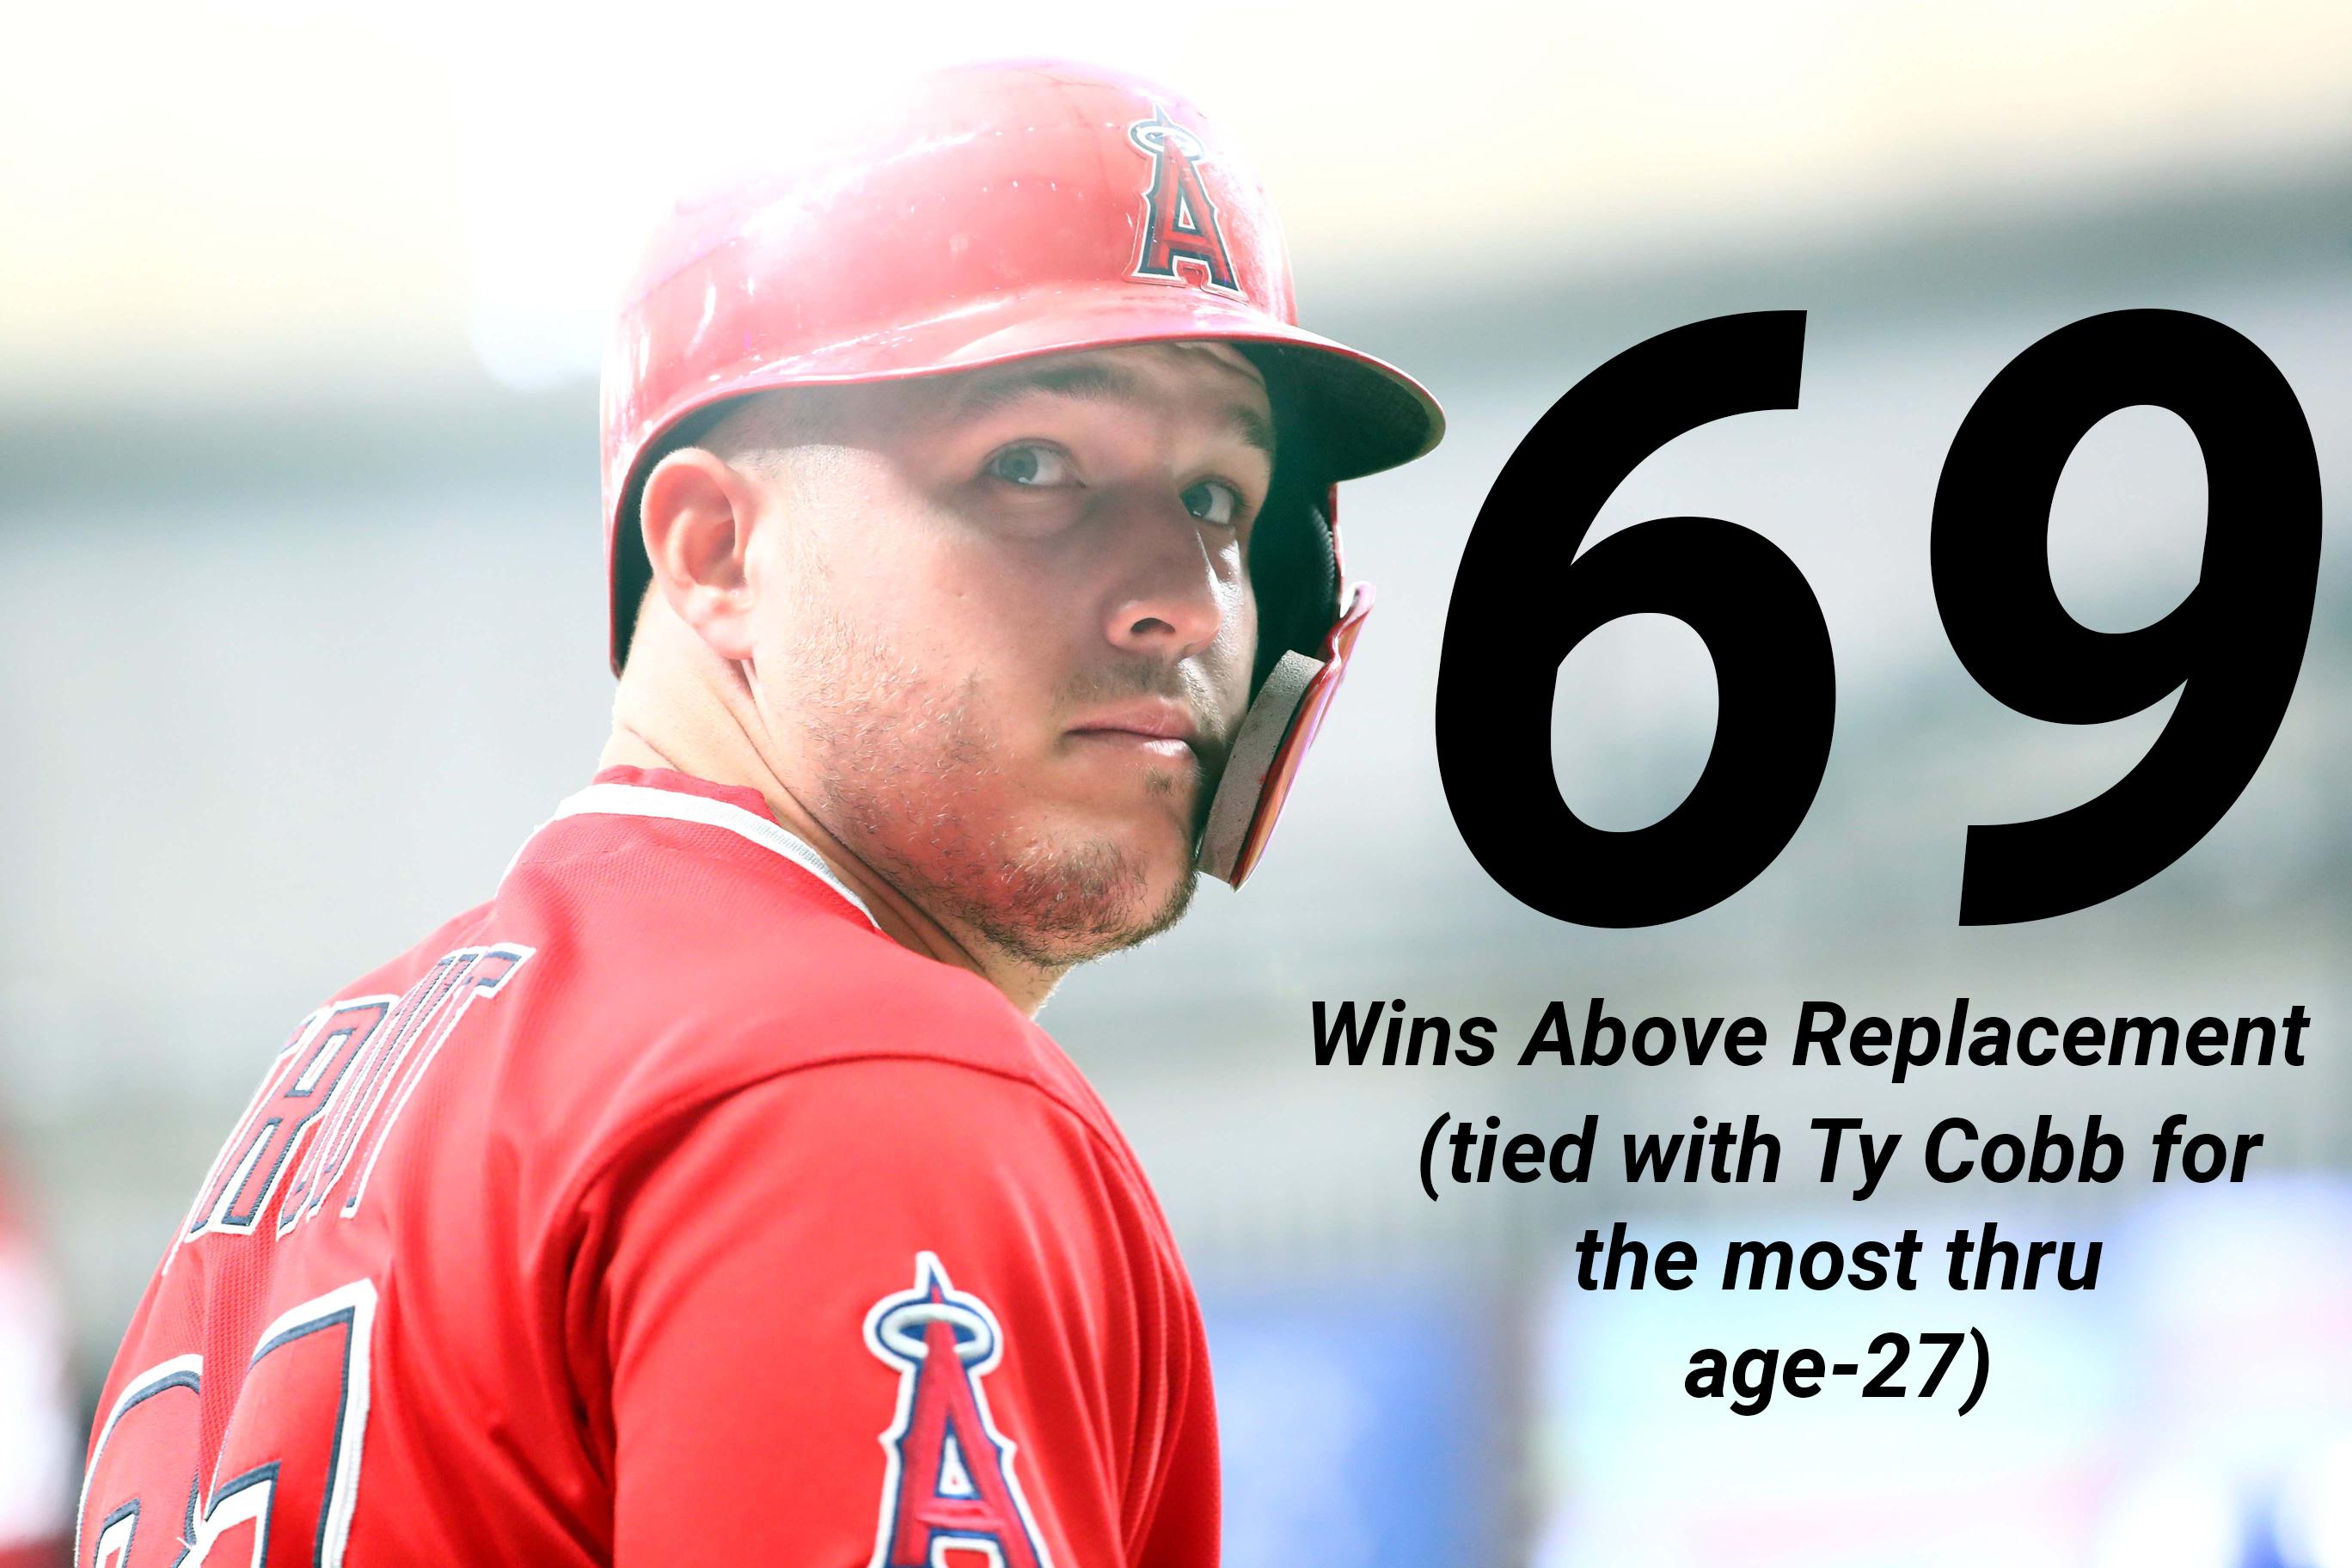 Baseball on Twitter: "Mike Trout's career WAR is 69.0. tied with Ty Cobb for the most WAR by a player through age-27 https://t.co/RROMkLAa1p" /